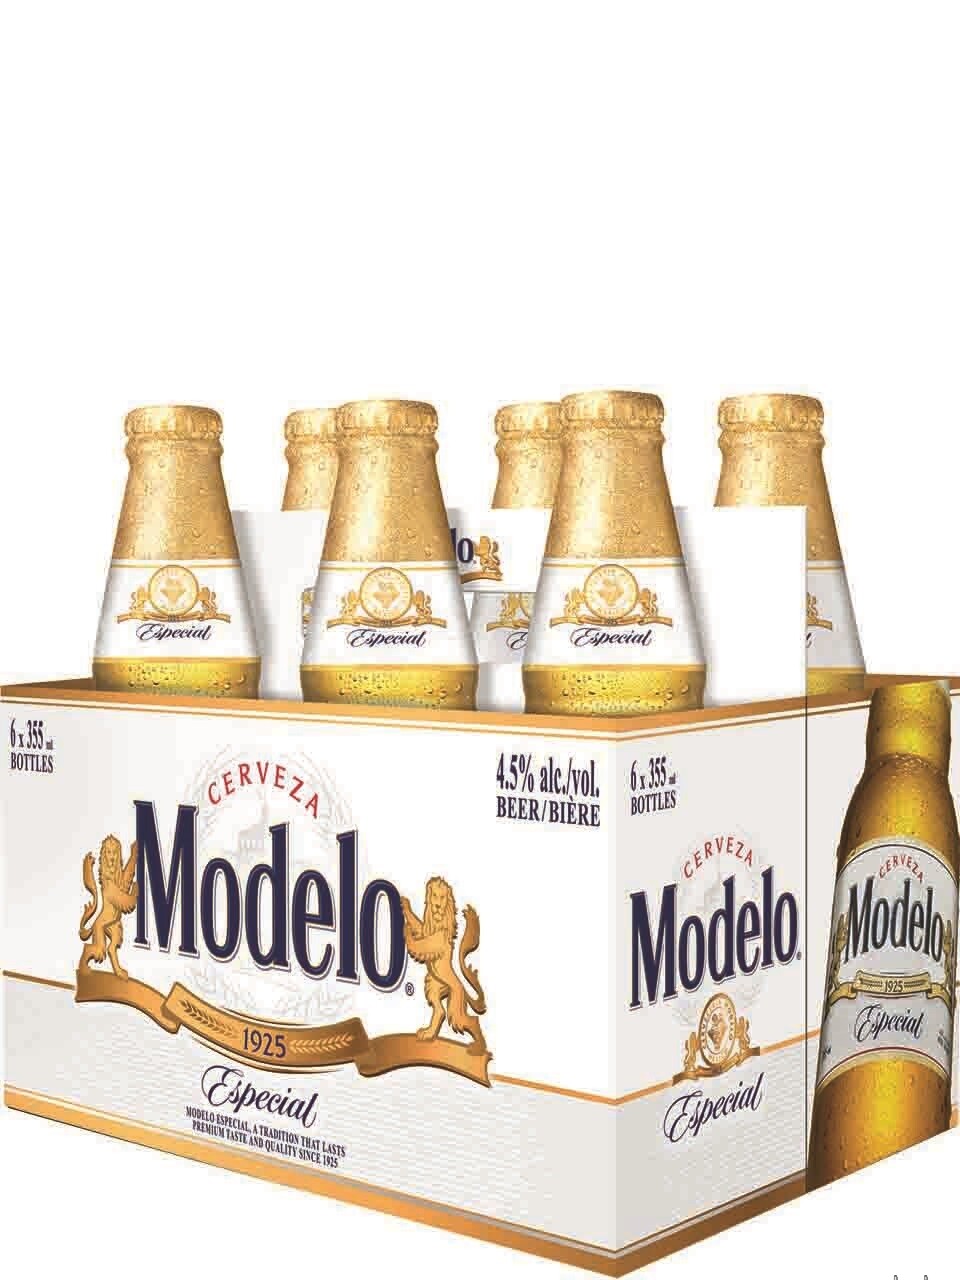  how much percent of alcohol is in modelo beer